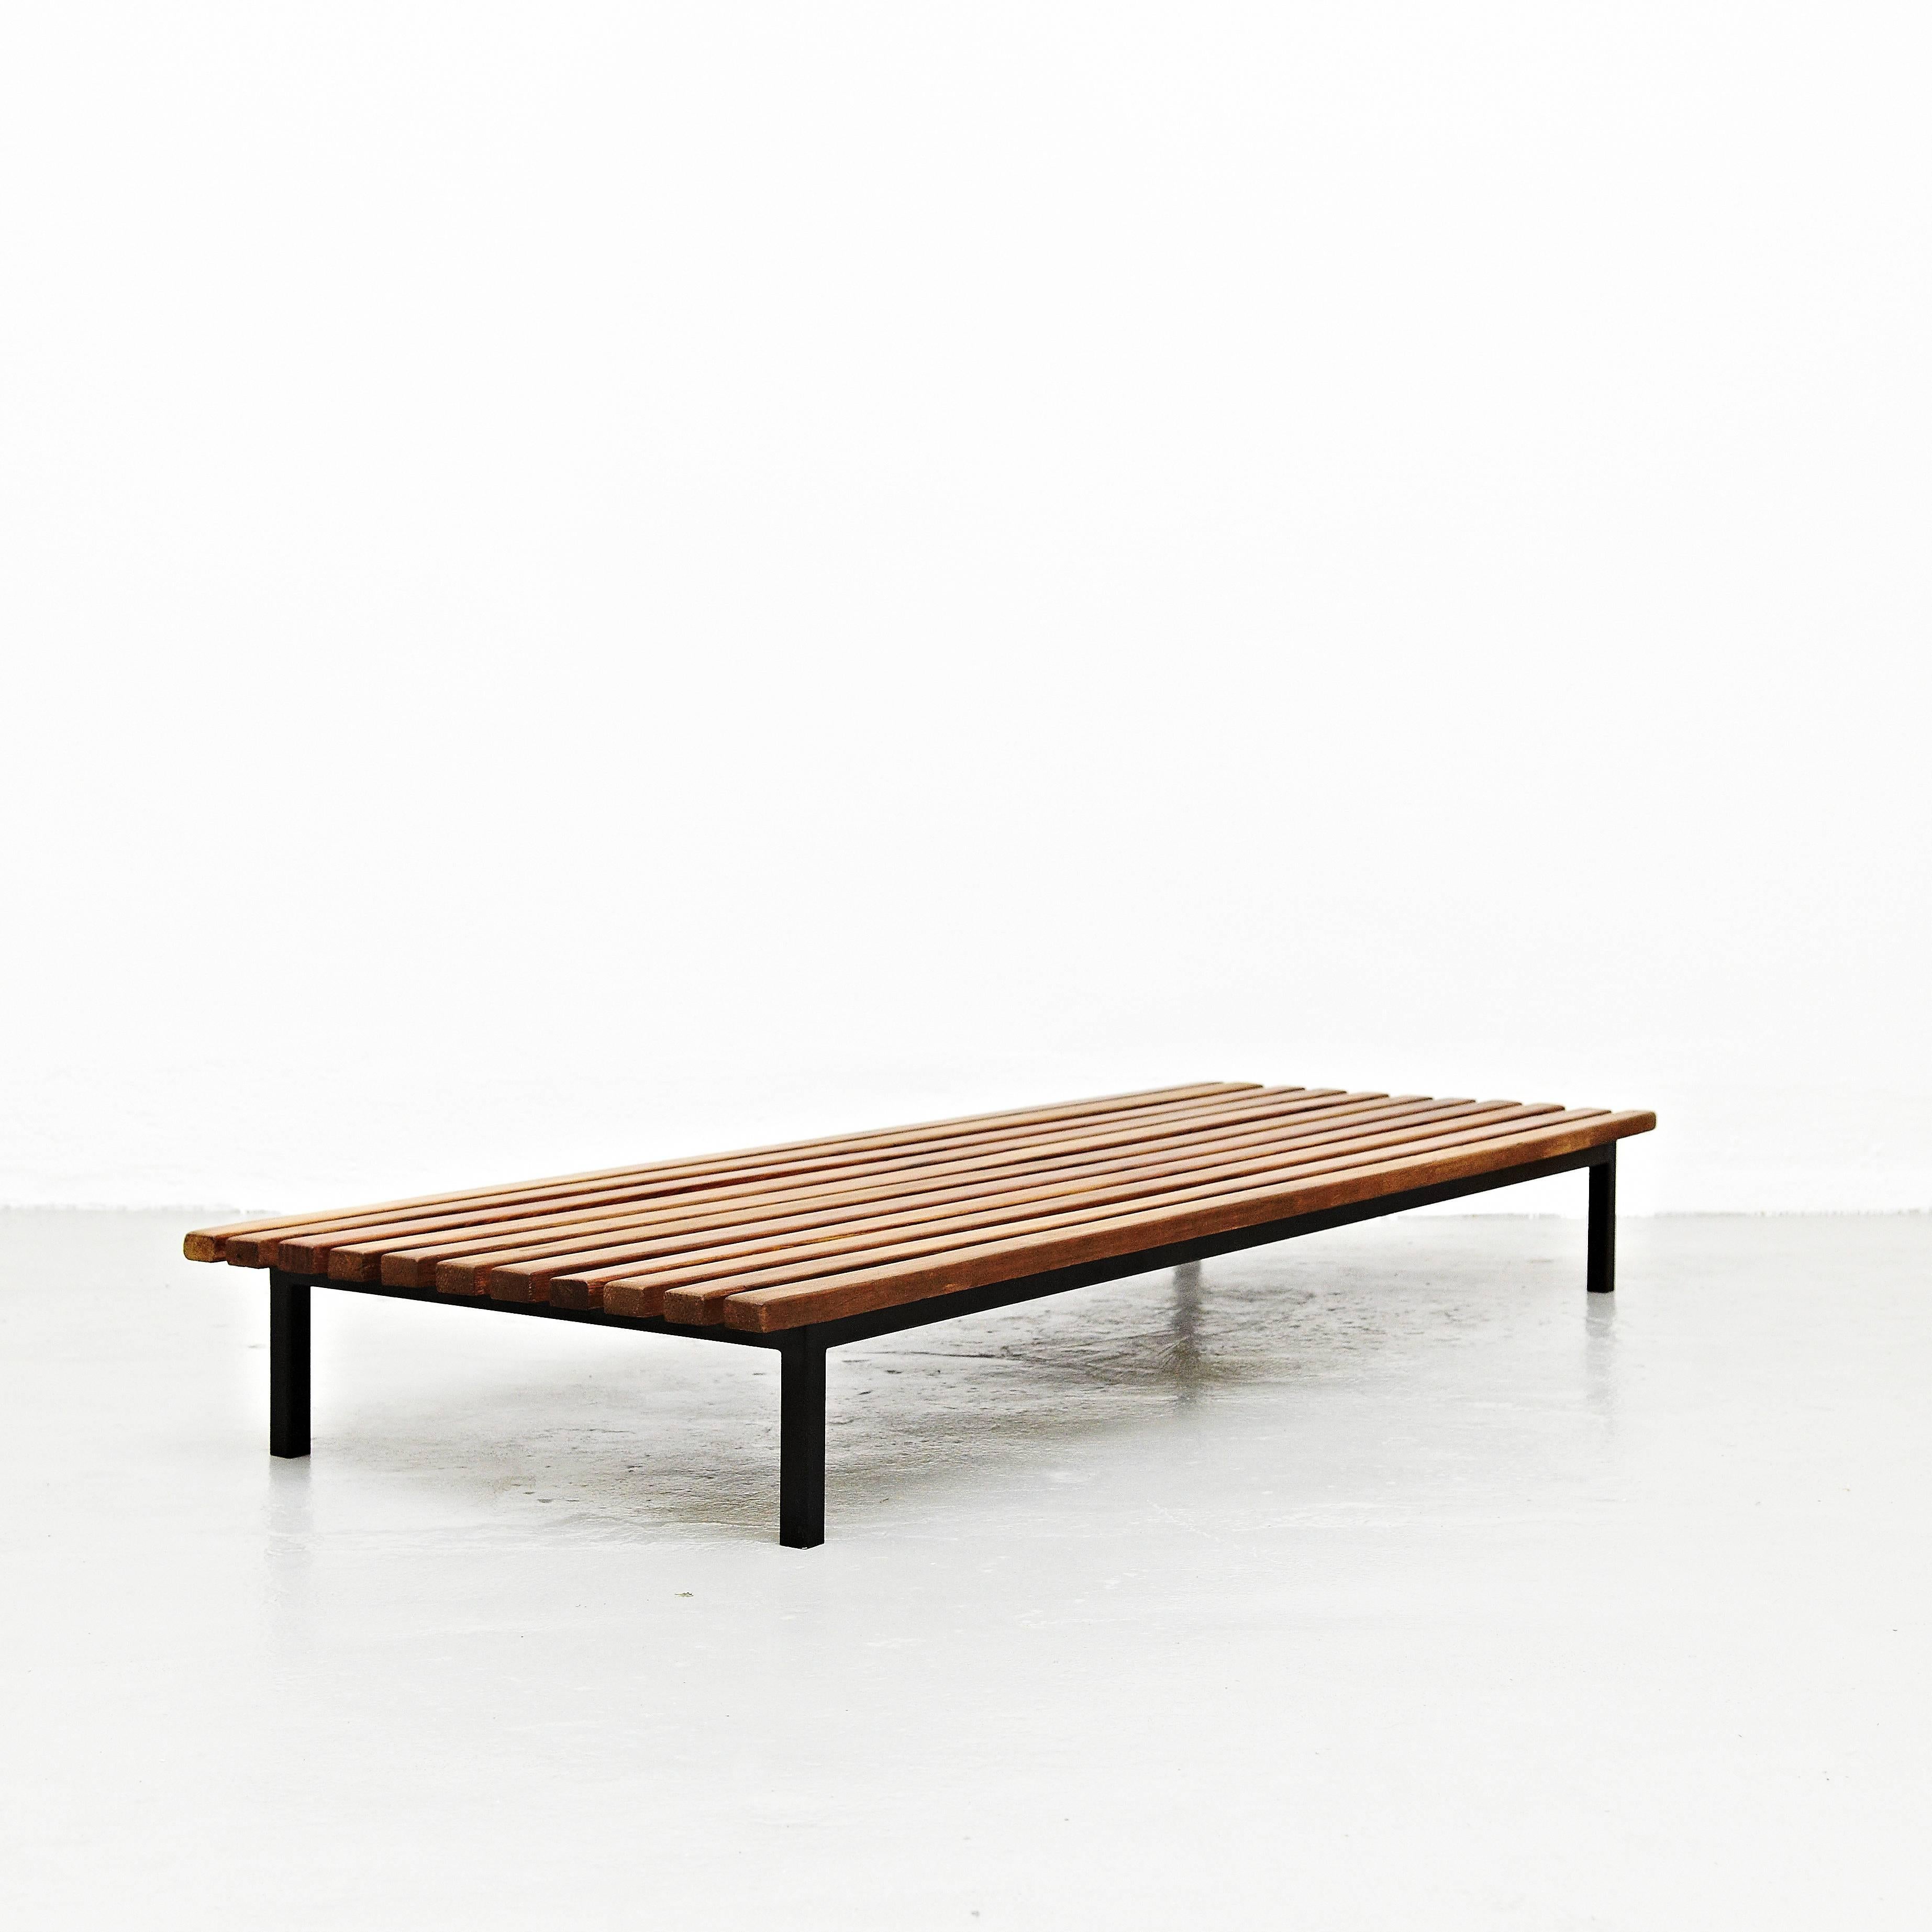 Bench designed by Charlotte Perriand, circa 1950.
This model is with 11 slats of wood.

Mahogany wood, metal frame legs.

Provenance: Cansado, Mauritania (Africa).

In good original condition, with minor wear consistent with age and use,